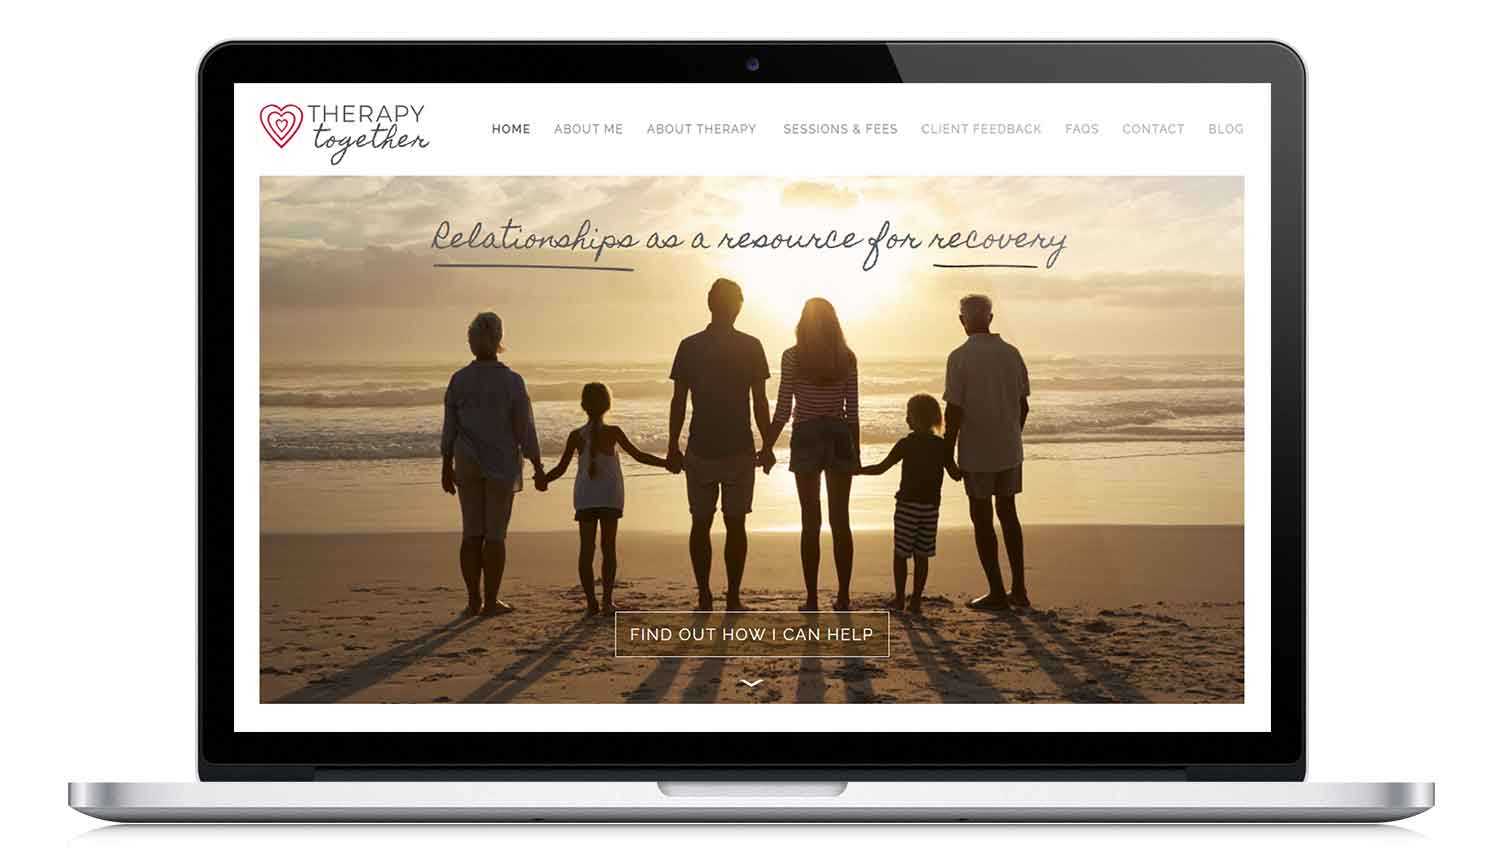 Bespoke website design: Therapy Together